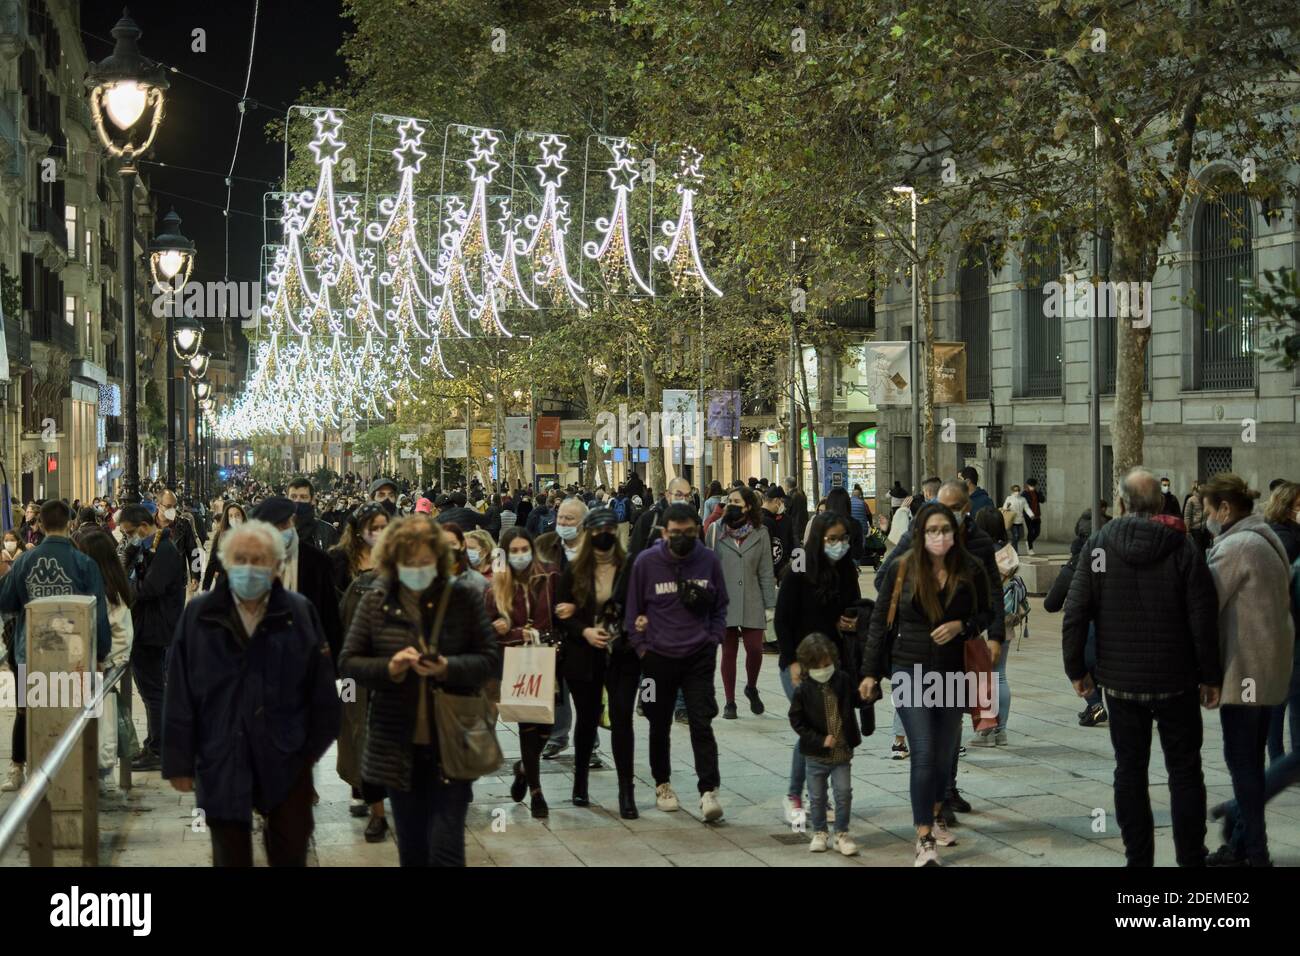 BARCELONA, CATALONIA, SPAIN - NOVEMBER 28, 2020: Portal del Angel full of people at night with decoration of lights welcoming Christmas in Barcelona Stock Photo